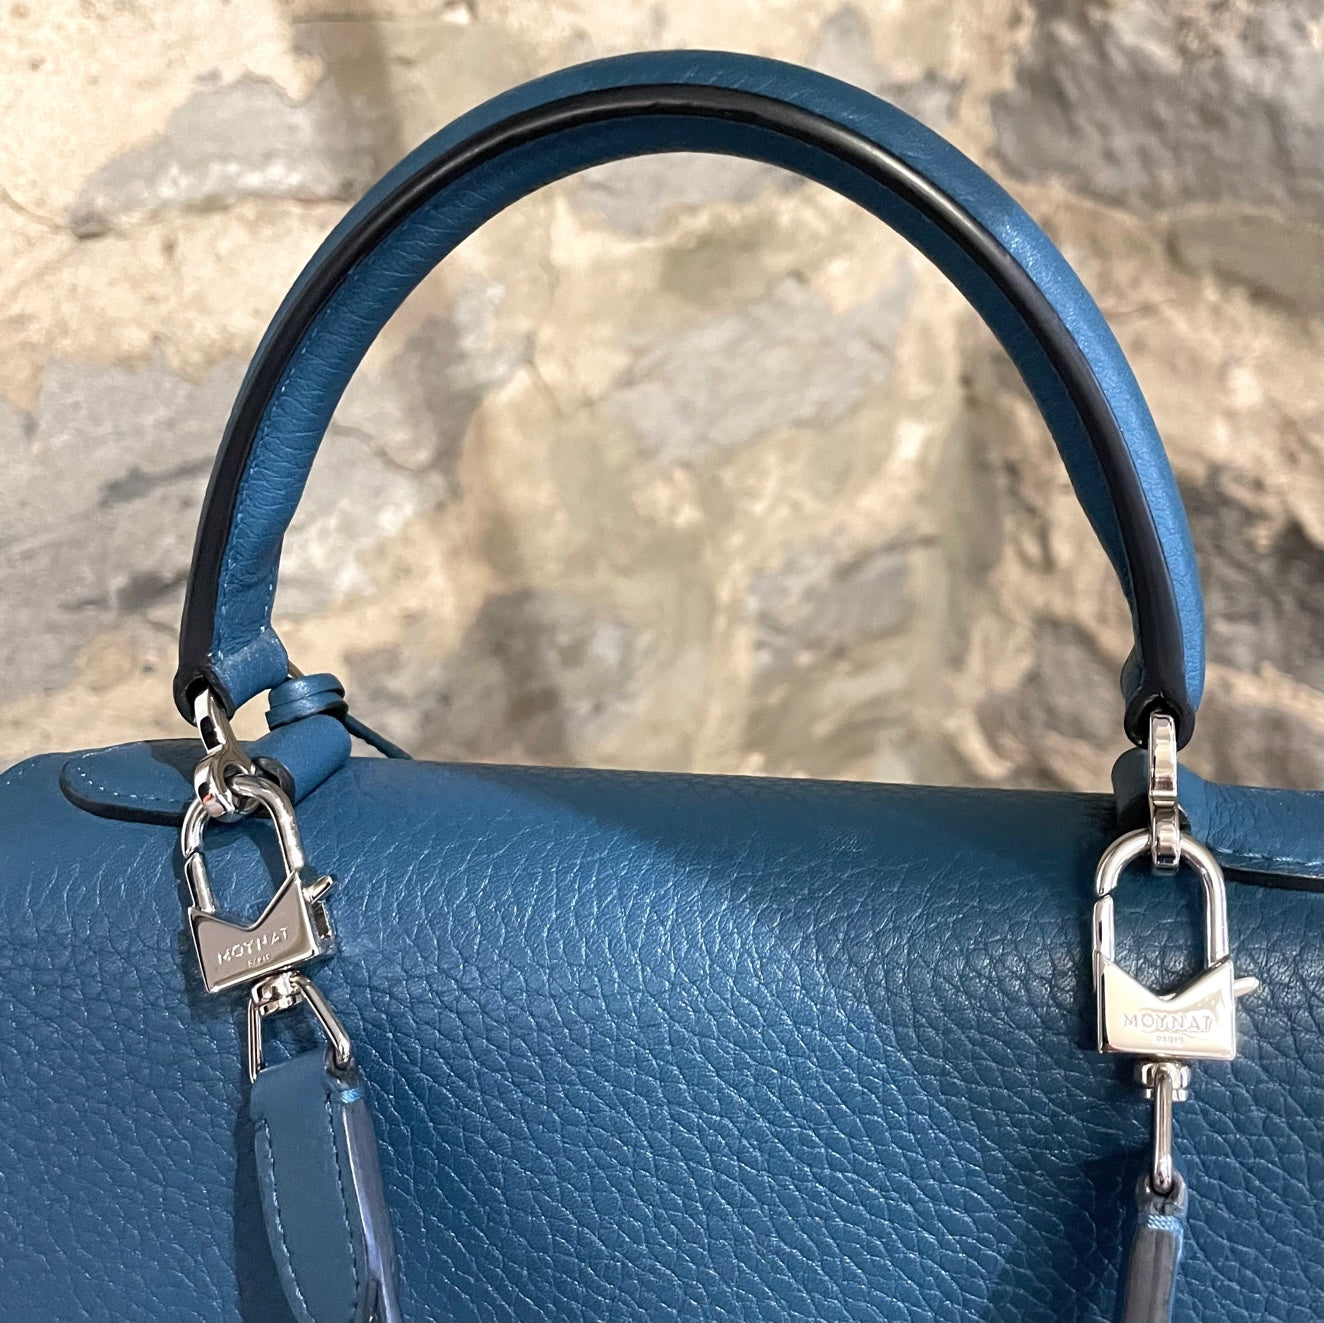 My new baby — Moynat Voyage PM in the shade Prussian Blue. : r